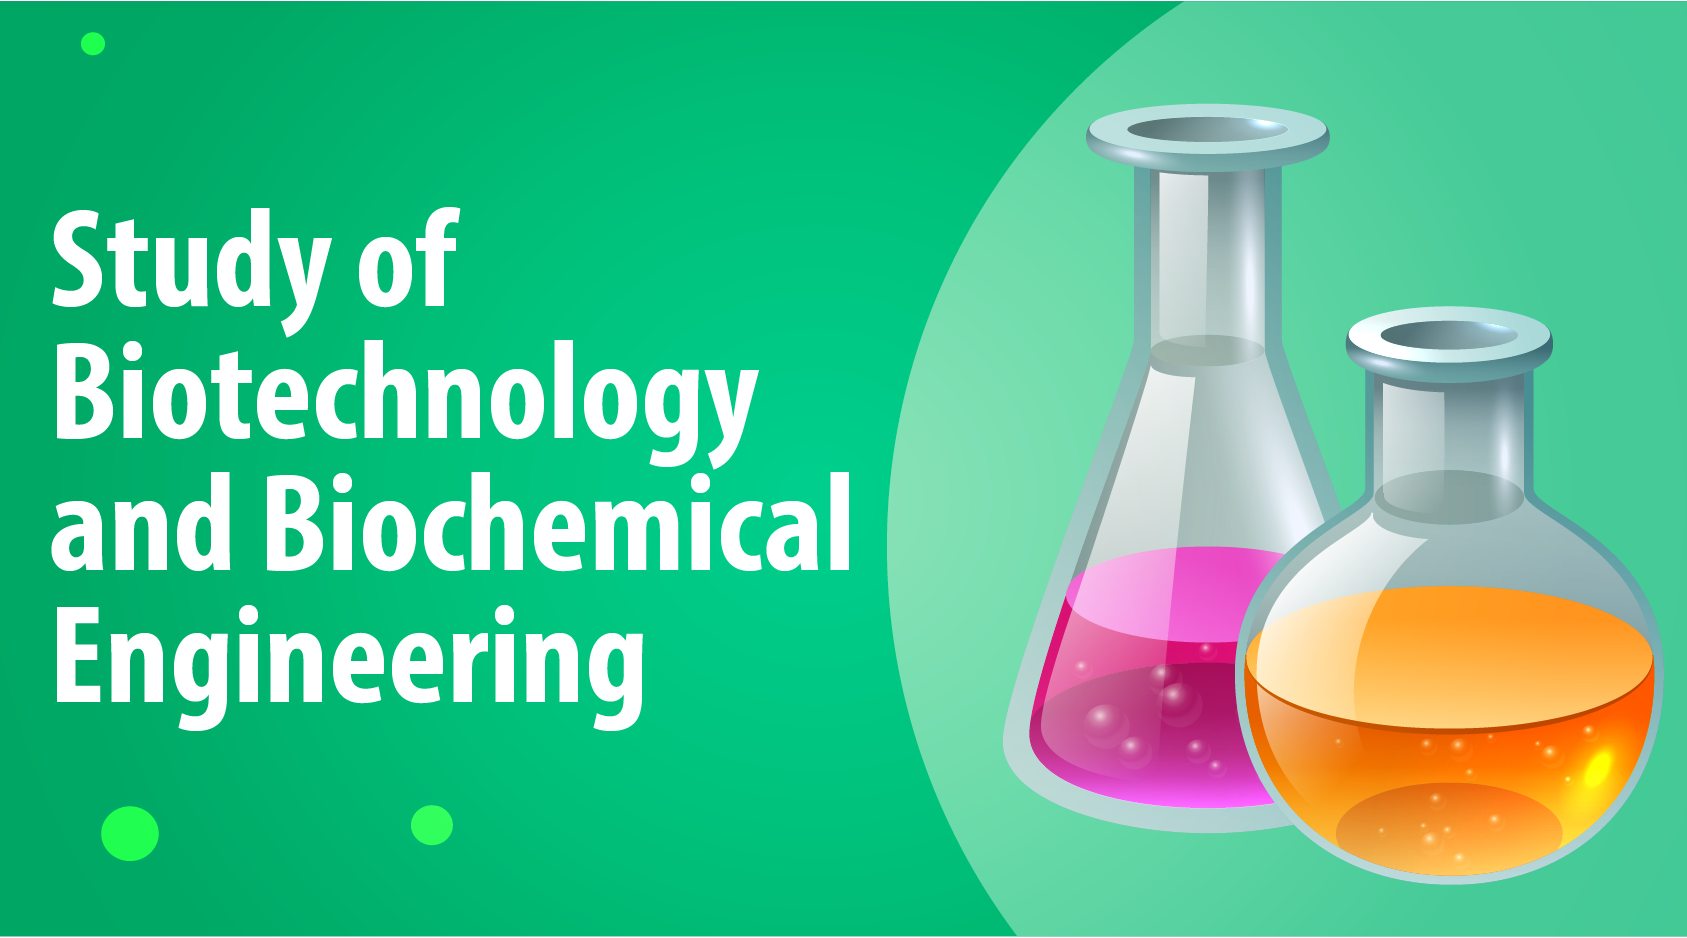 Biotechnology and Biochemical Engineering B.Tech, M.tech Course